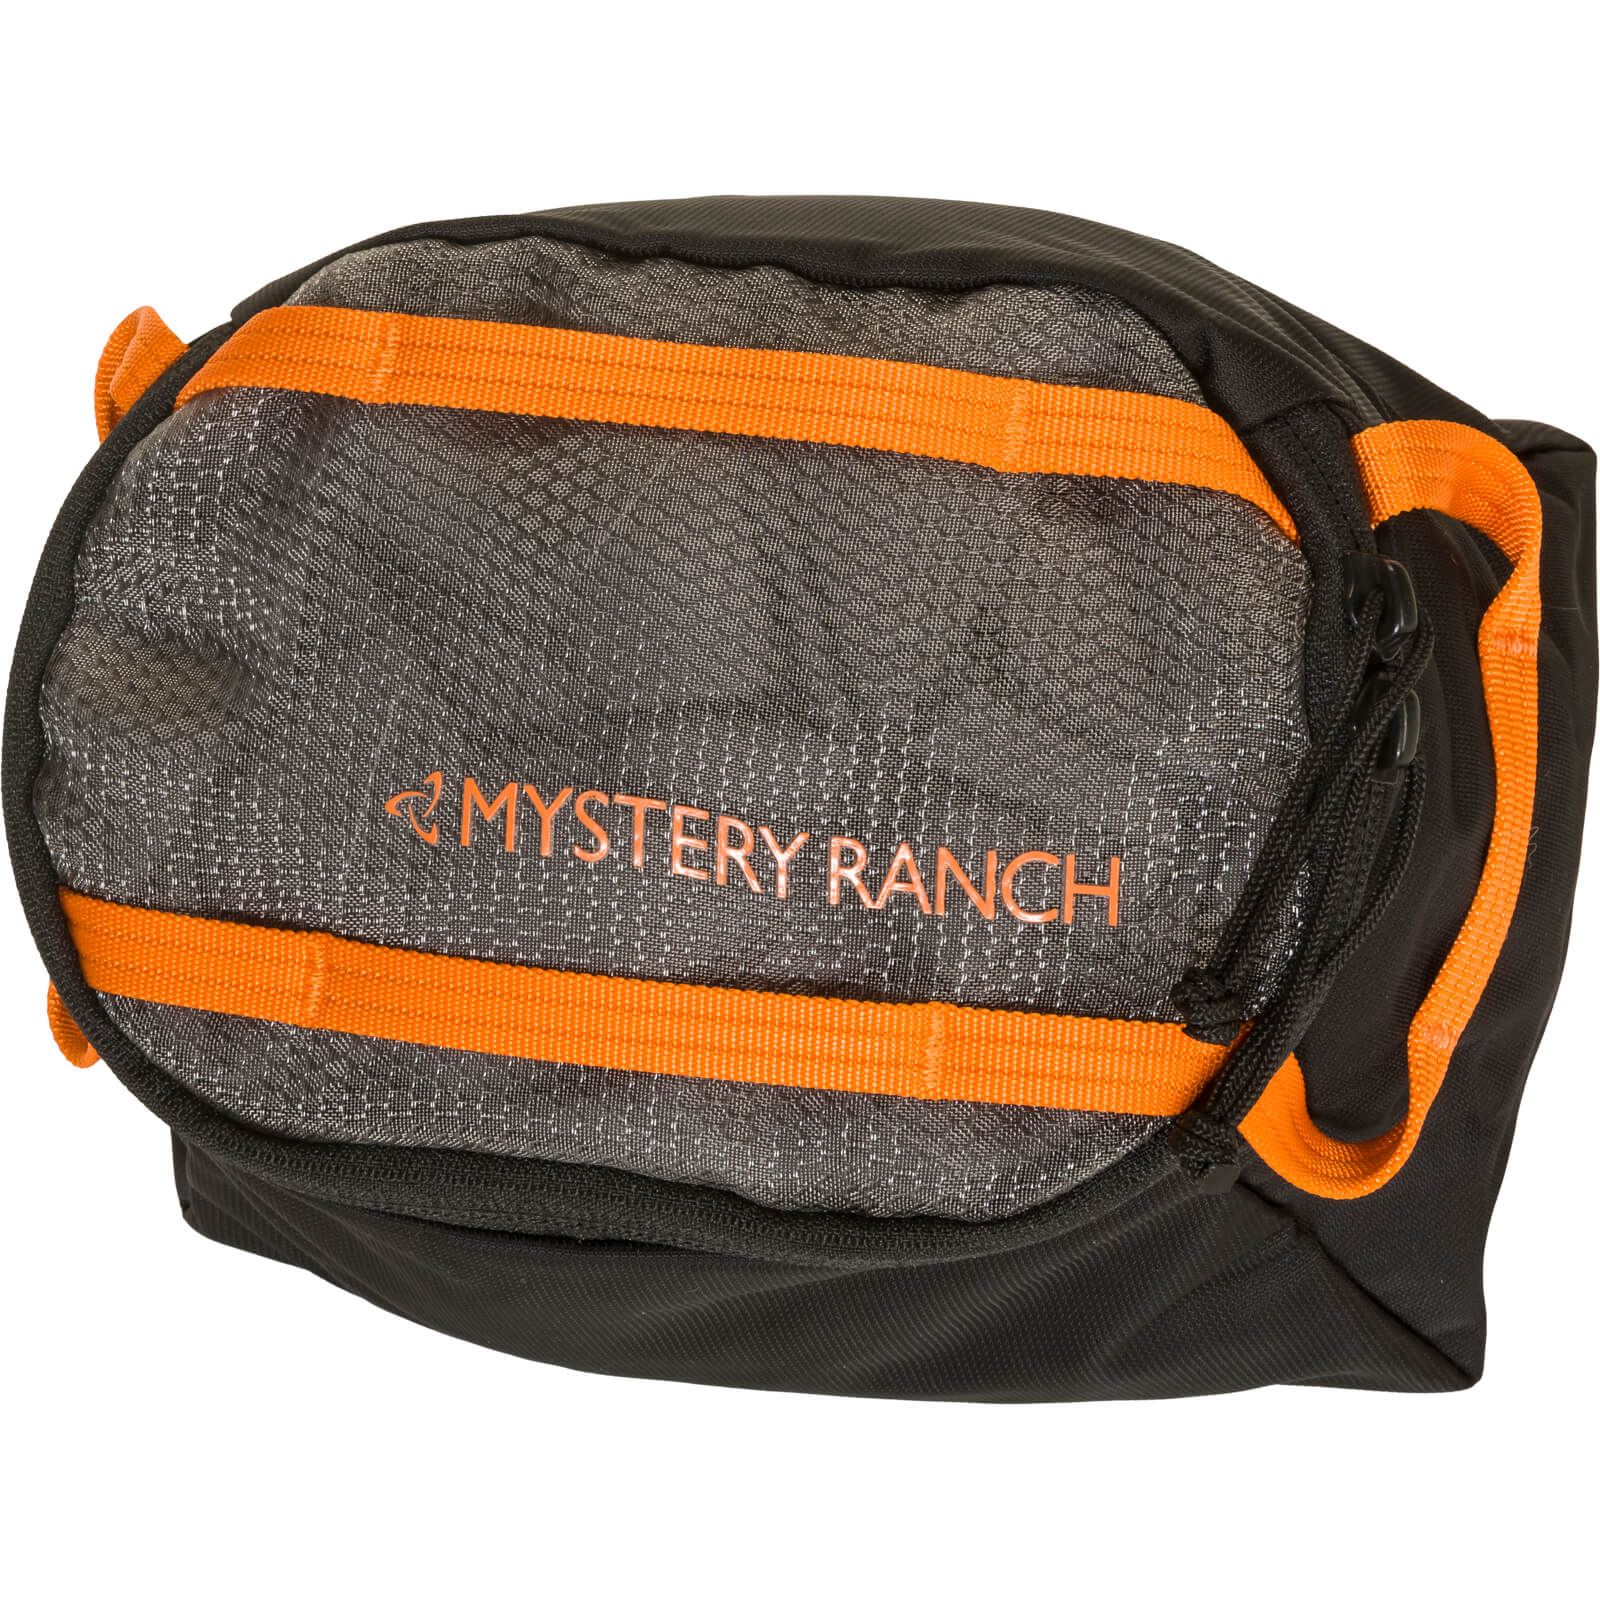 Zoid Cube Packing Organizers | MYSTERY RANCH Backpacks